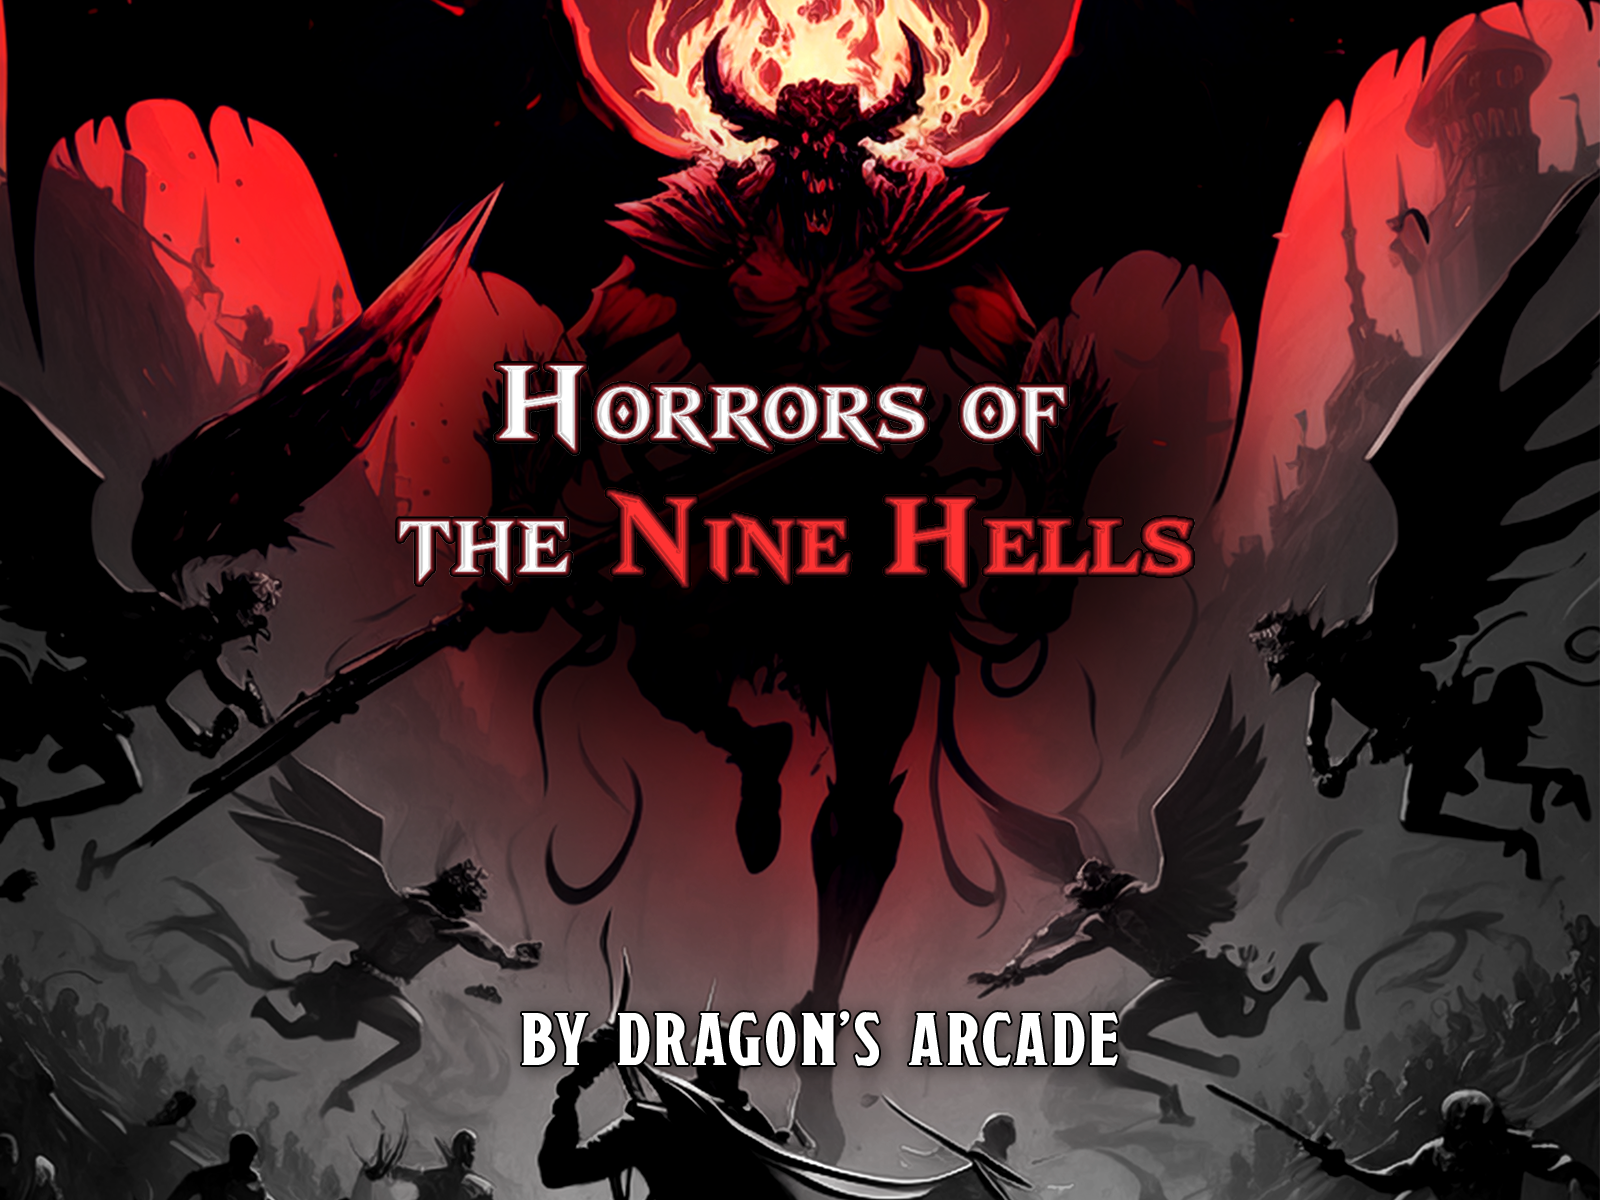 Horrors of the Nine Hells